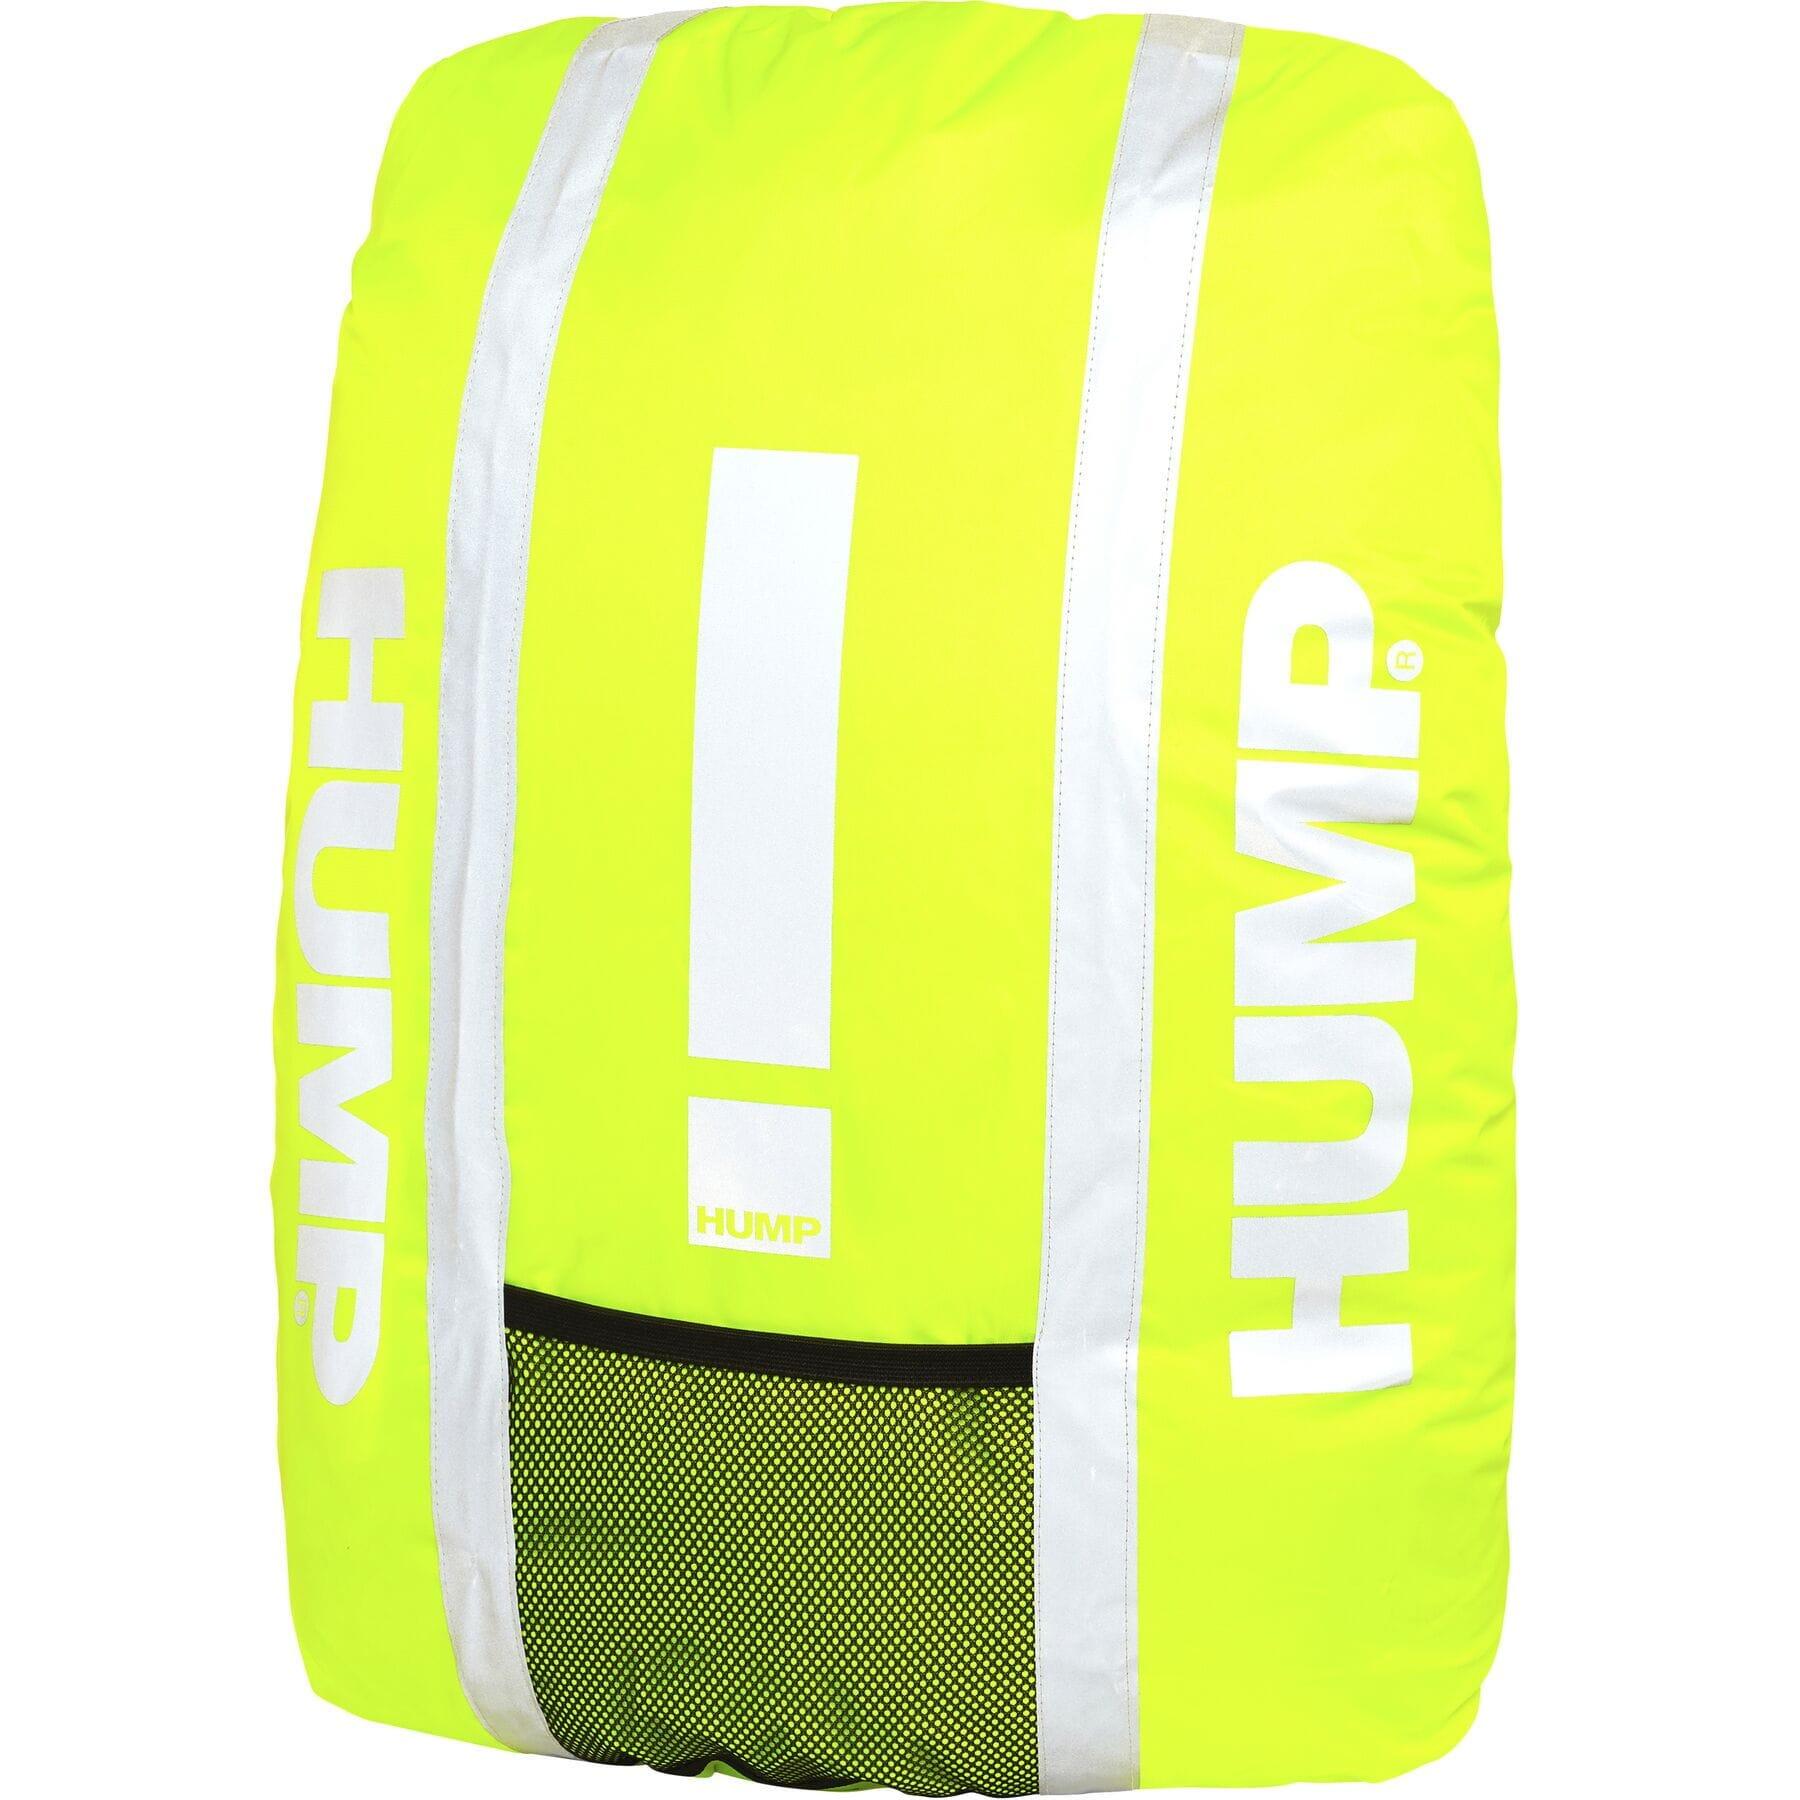 Deluxe HUMP Reflective Waterproof Backpack Cover - Safety Yellow 1/1